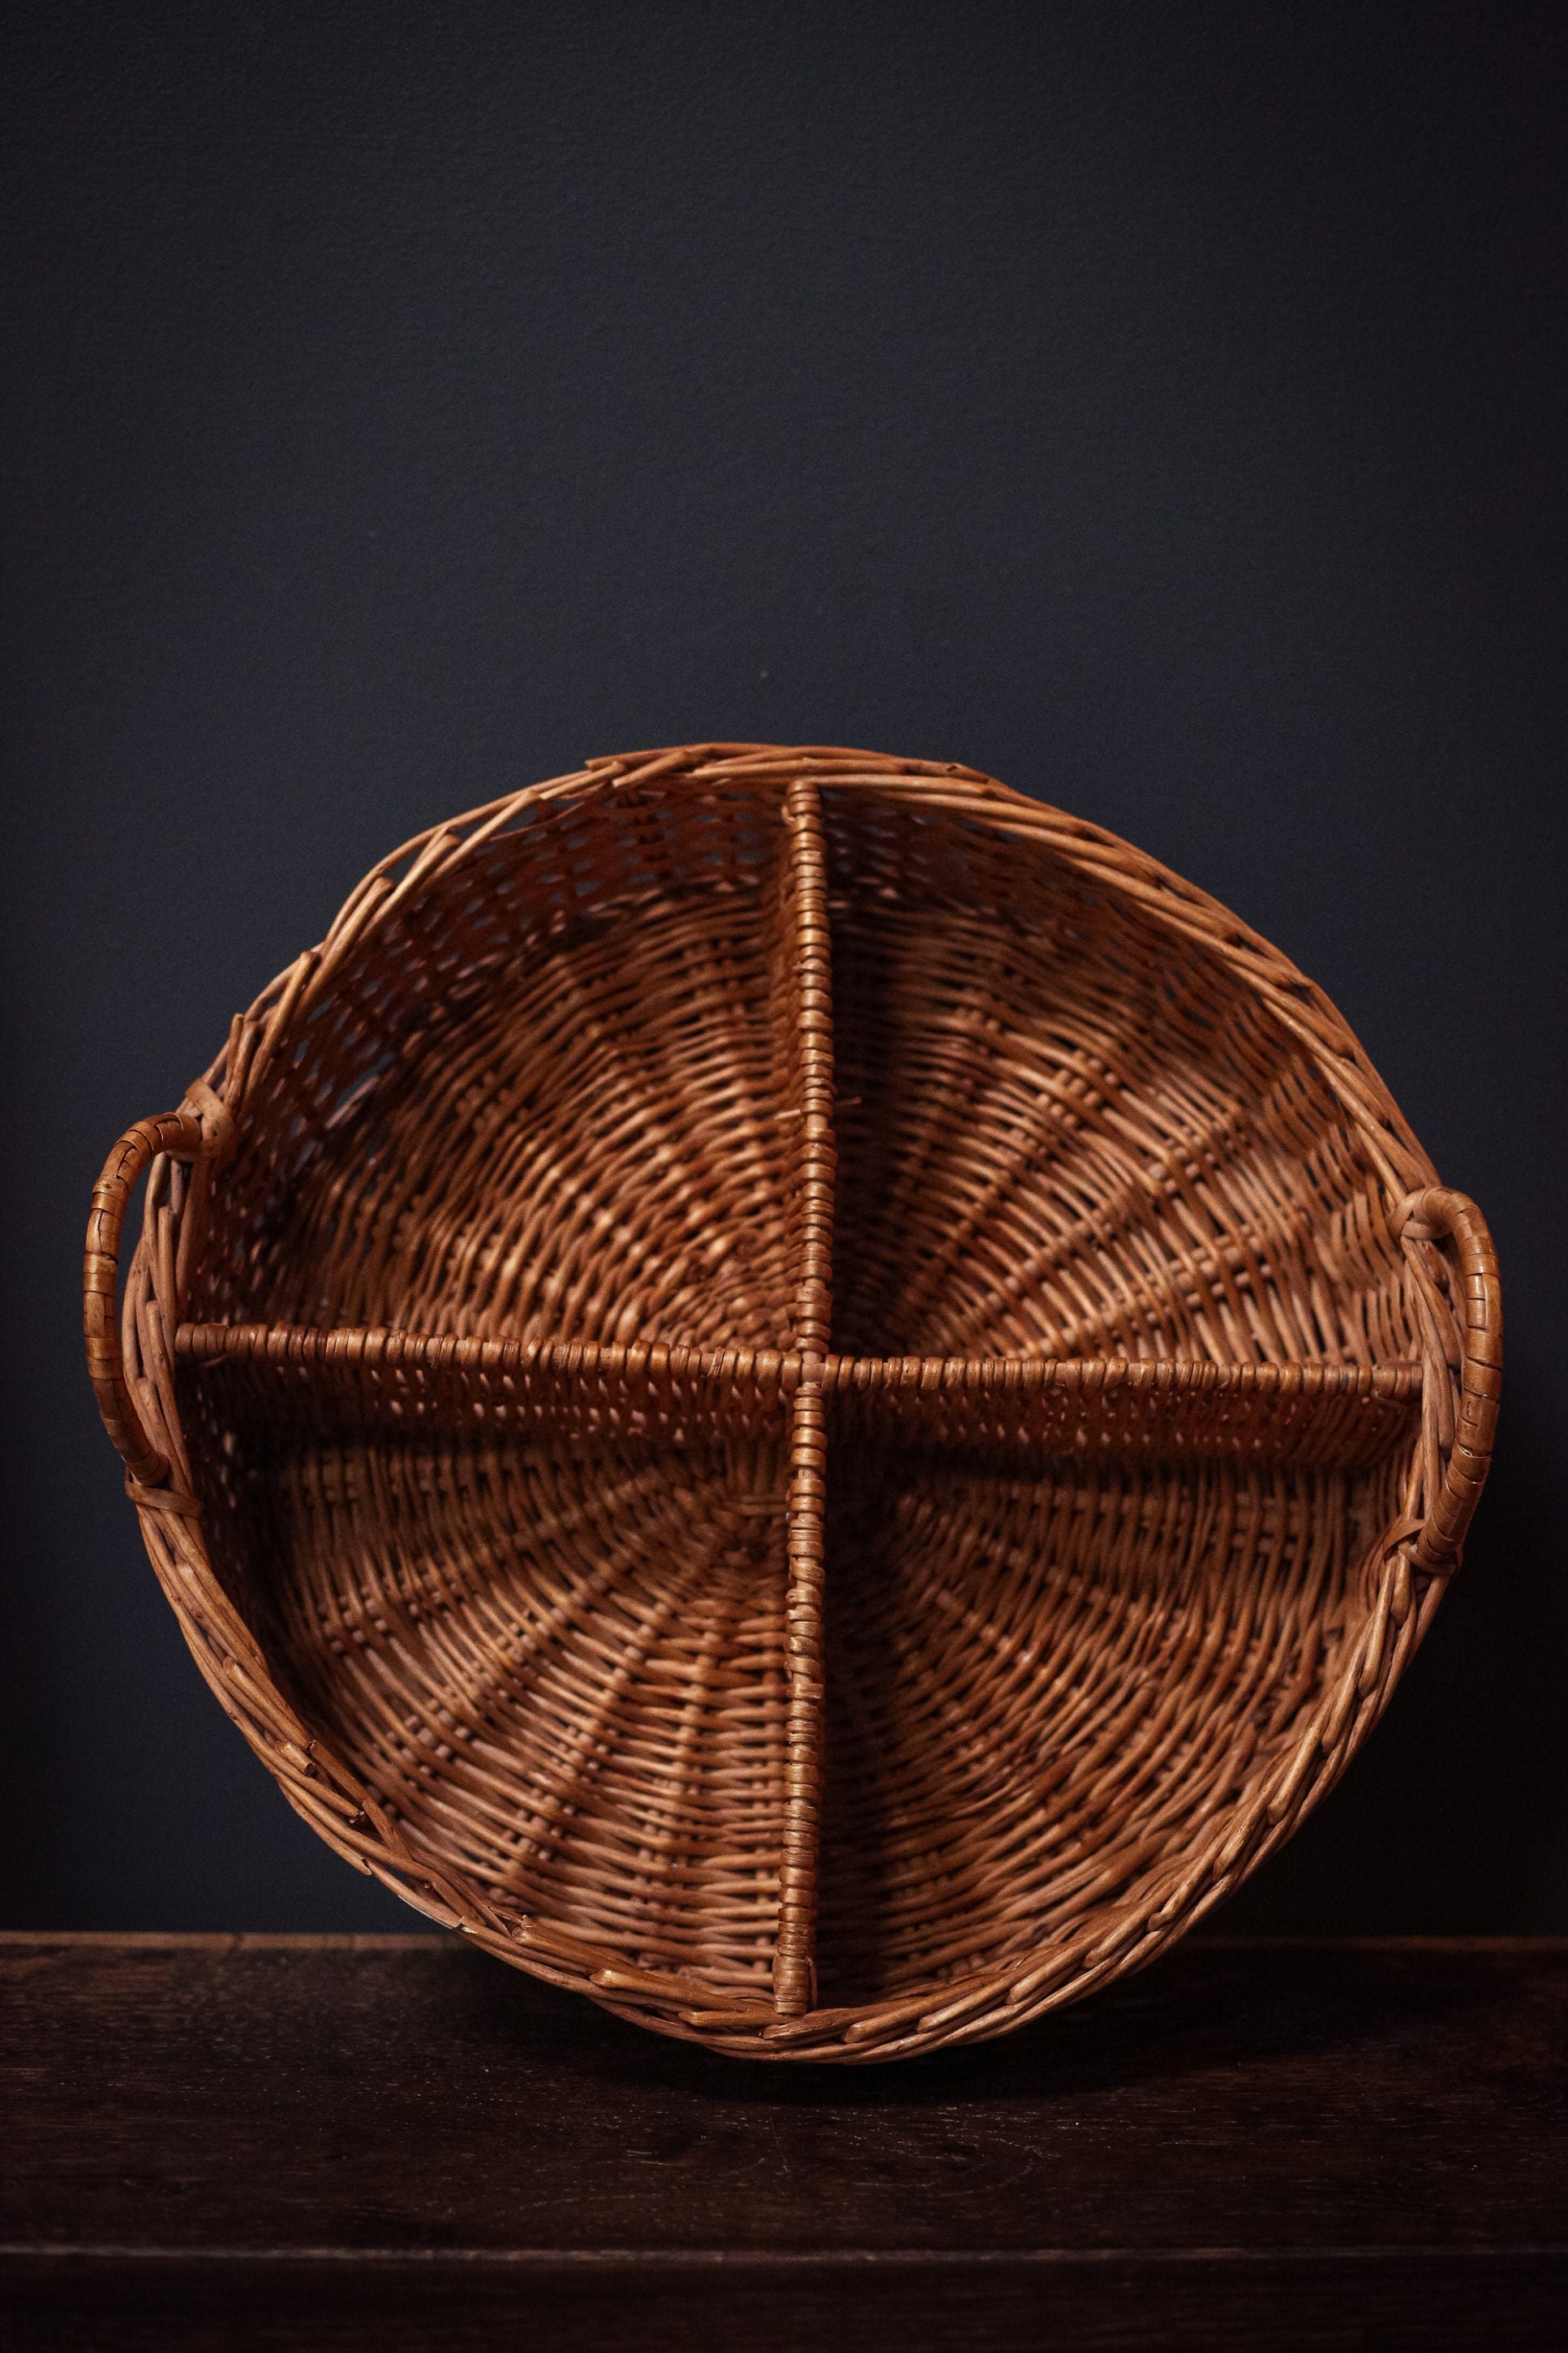 Divided Console Basket with Handles - Round Wicker/Rattan Modern Farmhouse Basket